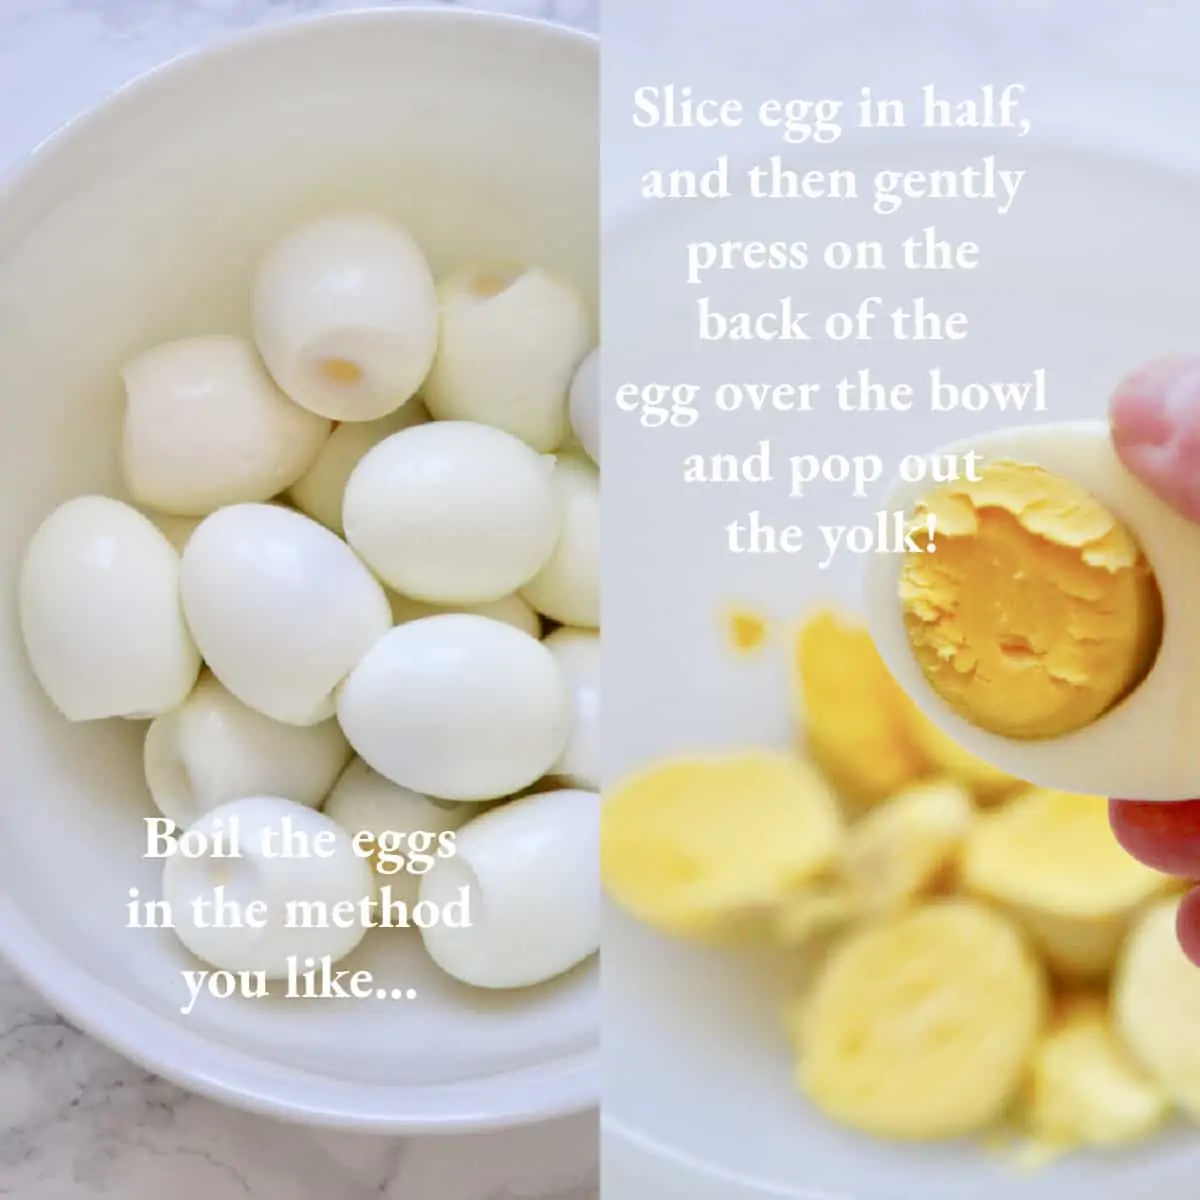 A graphic showing boiled eggs and how to remove yolk from cooked eggs.